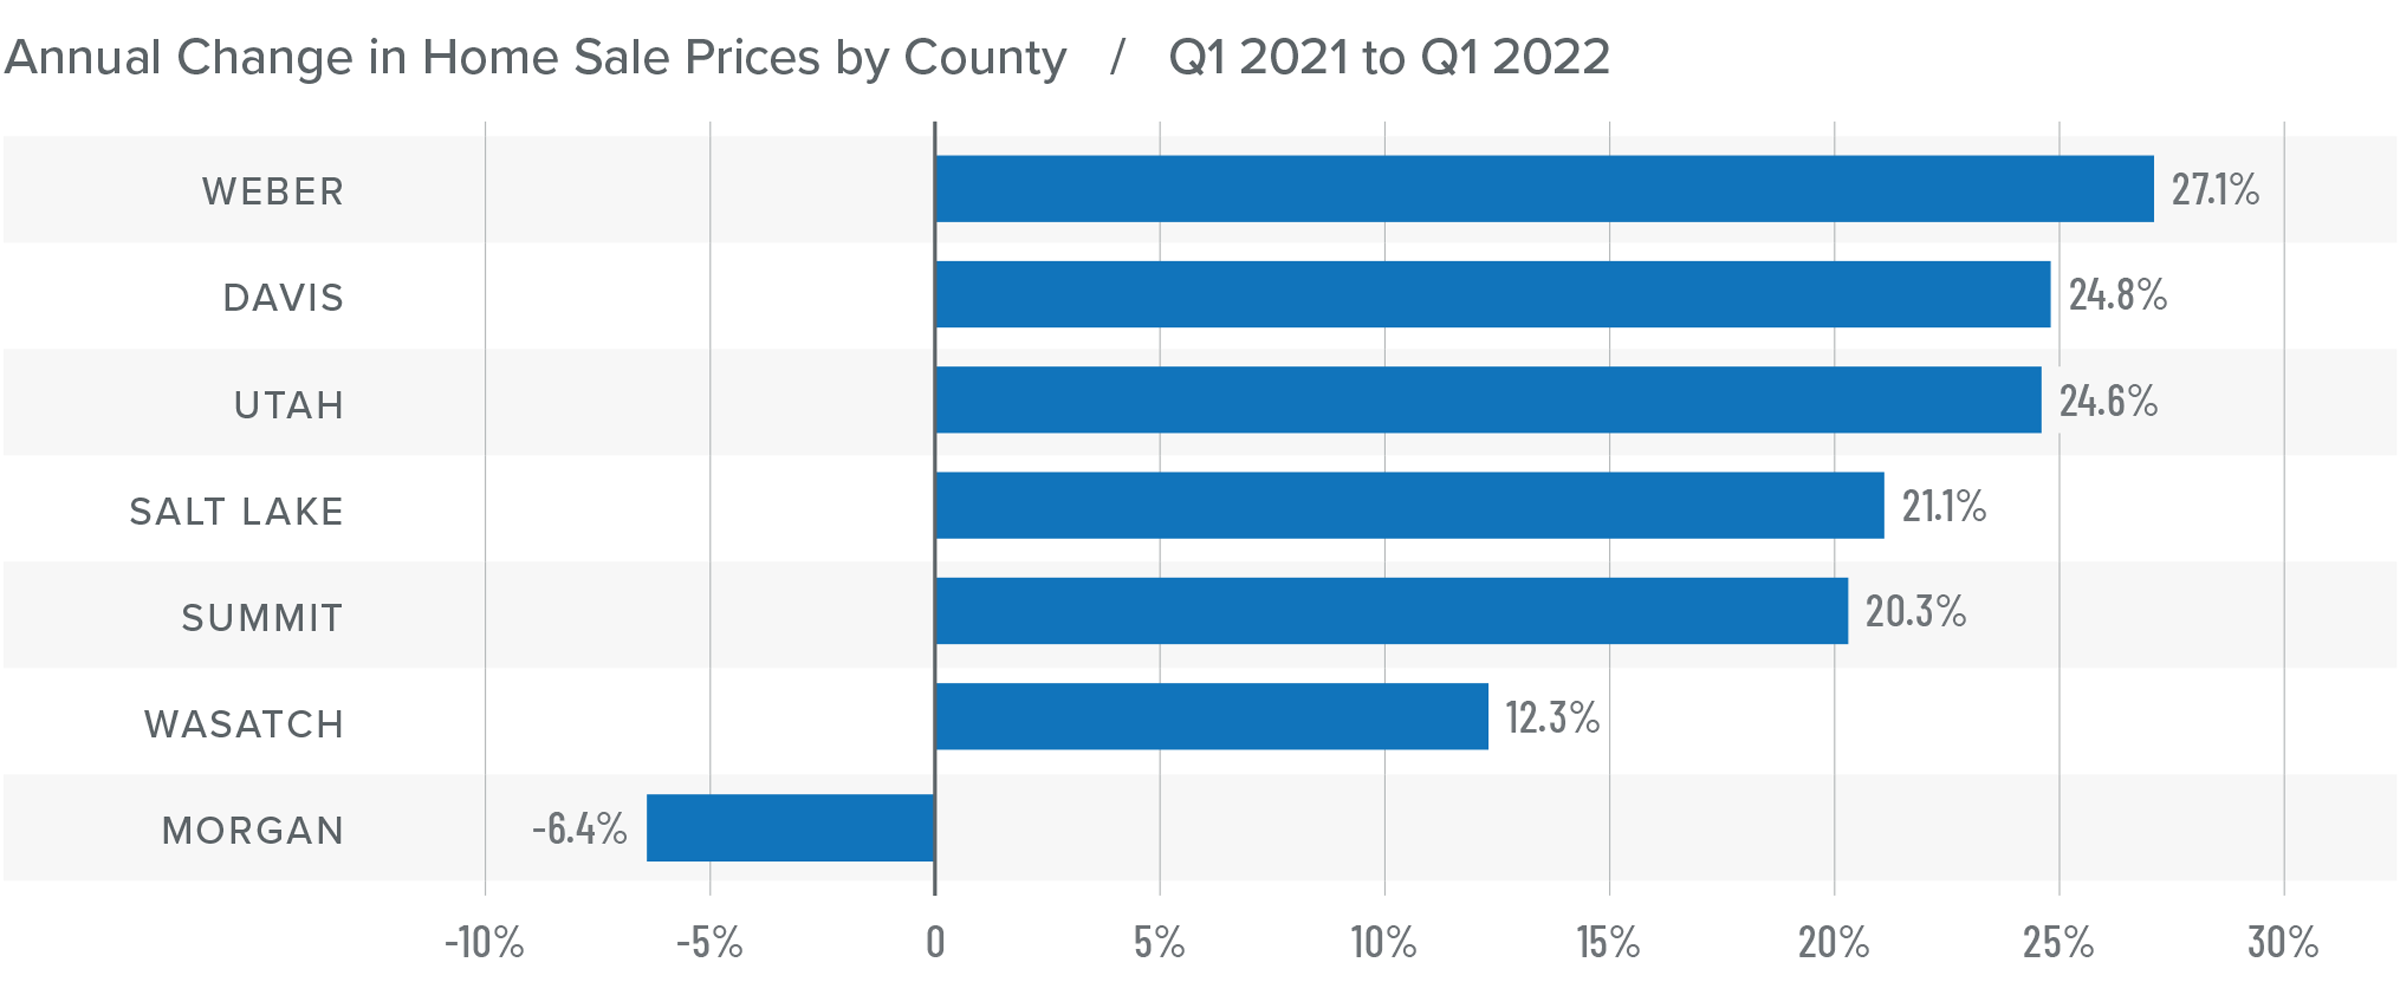 A bar graph showing the annual change in home sale prices for various counties in Utah from Q1 2021 to Q1 2022.